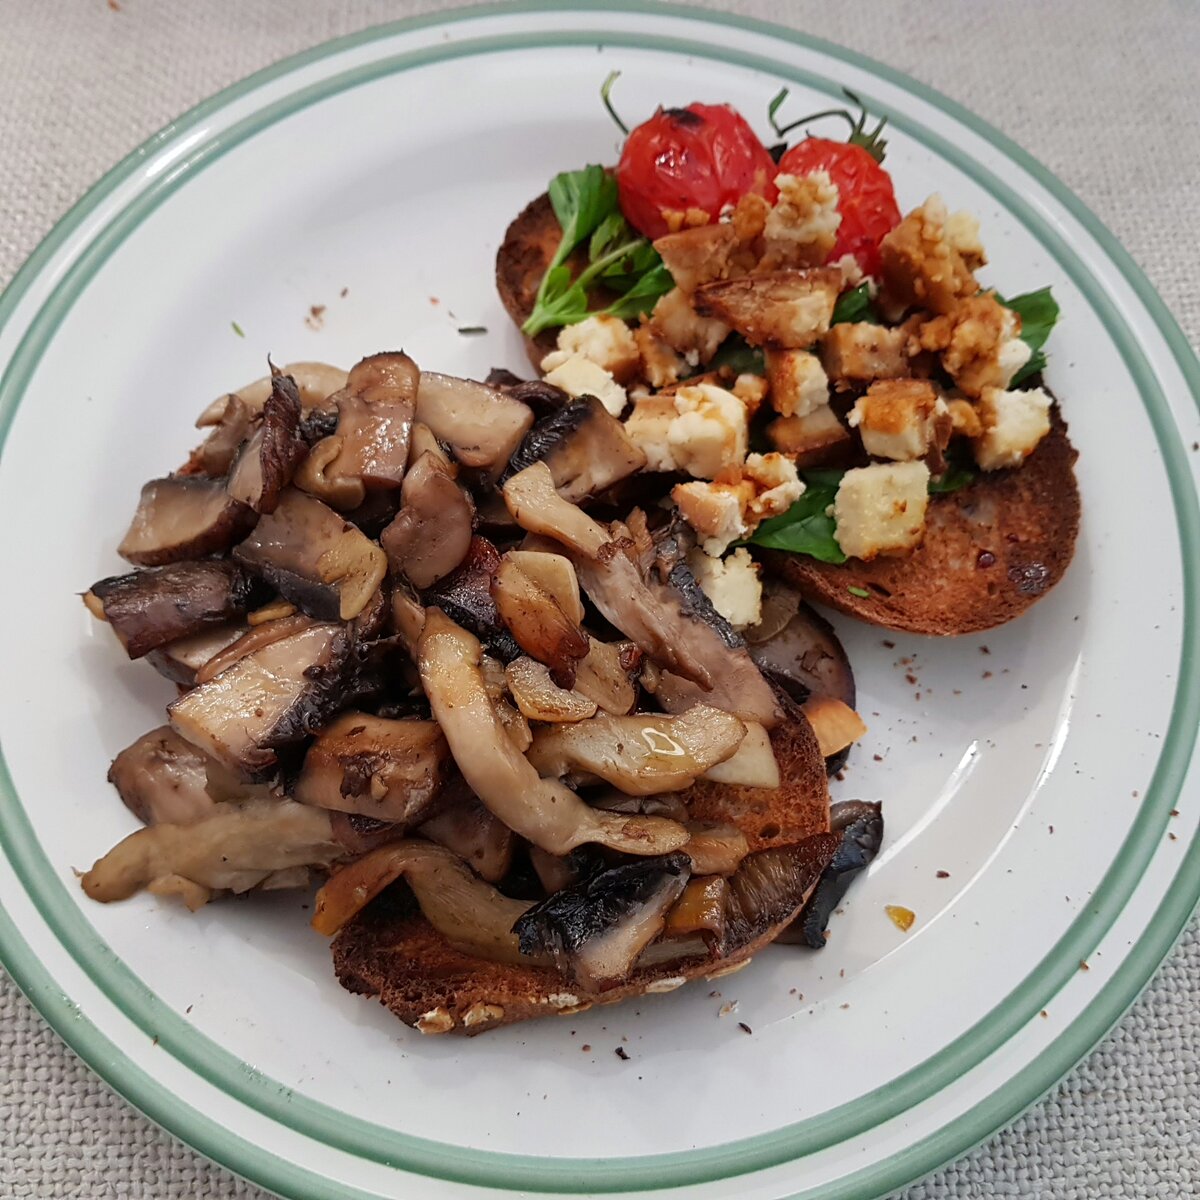 White Oyster Mushrooms cooked for lunch